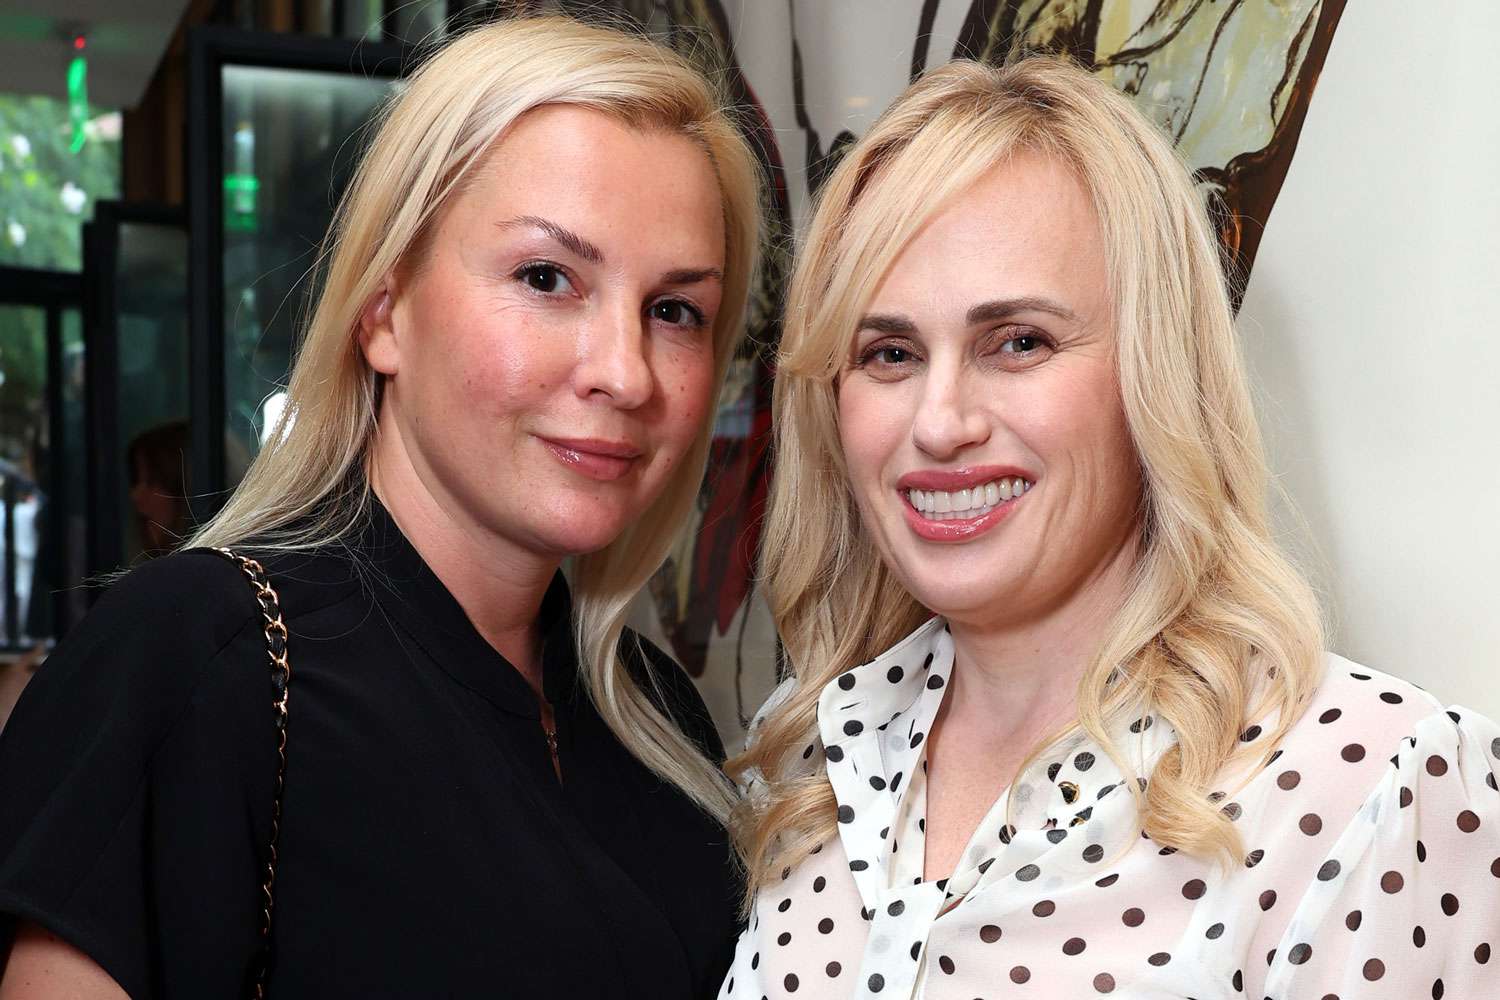 Rebel Wilson and Ramona Agruma Step Out for Red Carpet Date Night at “Masters of the Air ”Screening